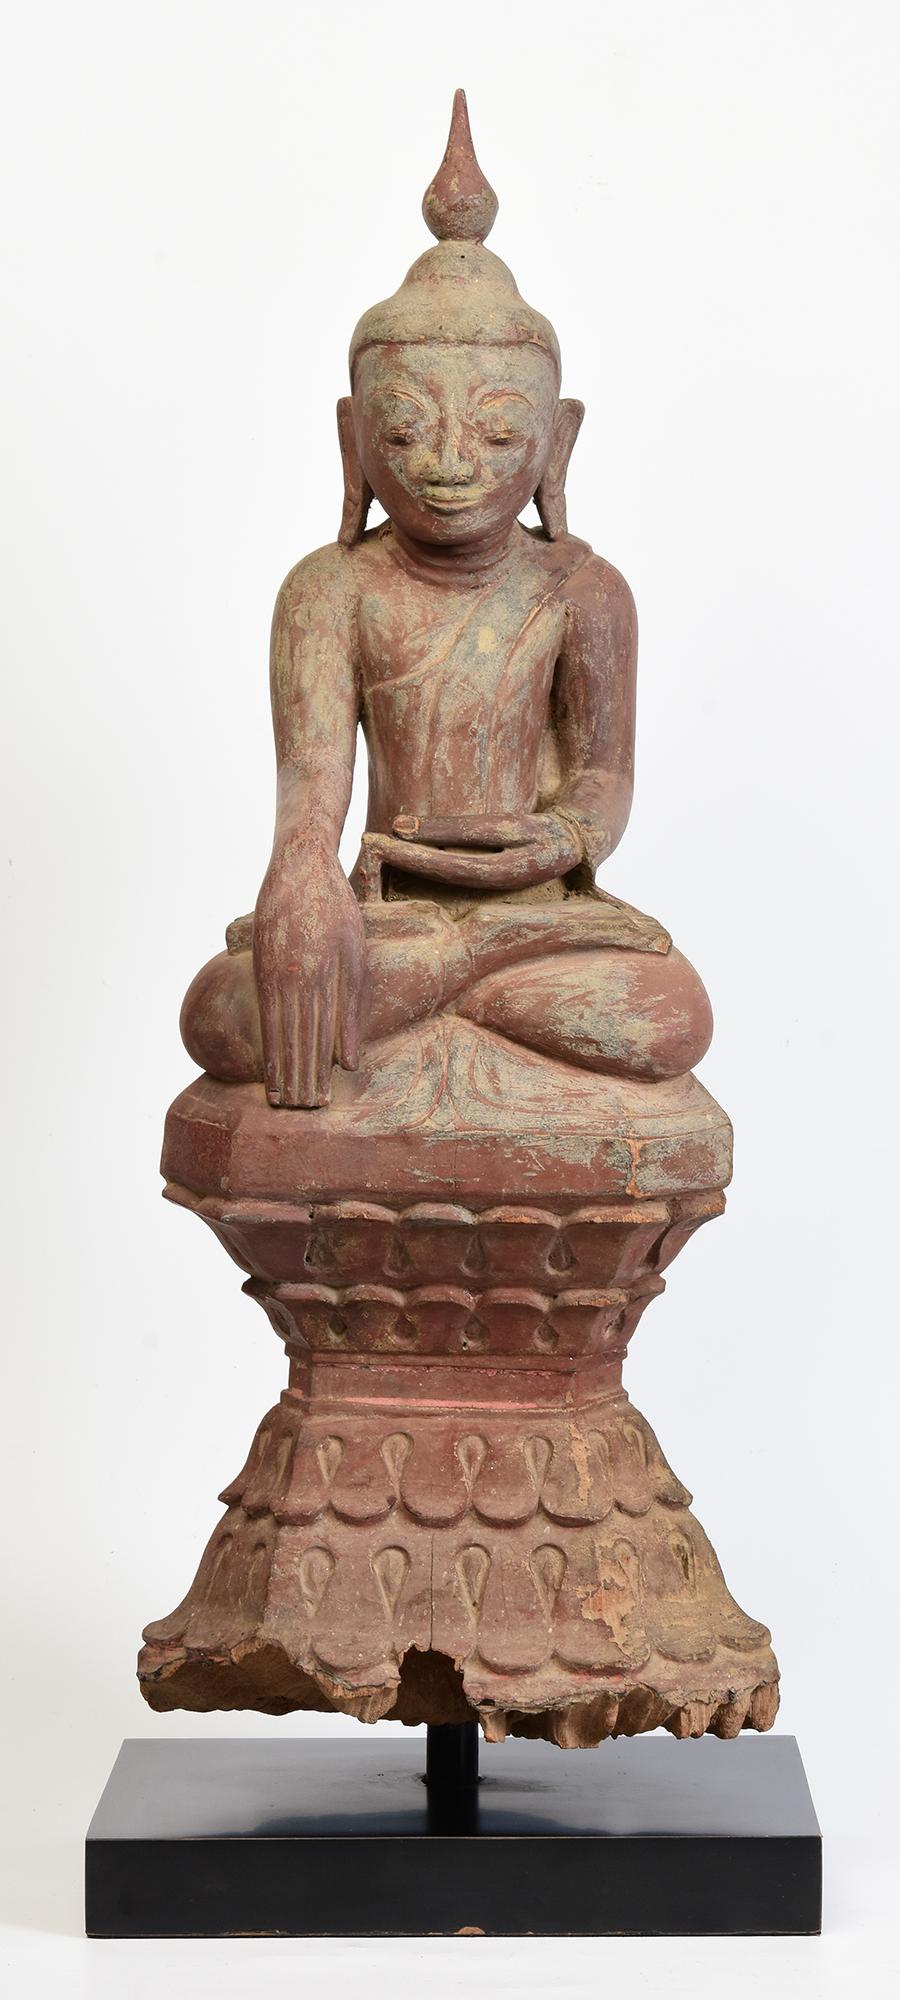 Antique Burmese wooden Buddha sitting in Mara Vijaya (calling the earth to witness) posture on a base.

Age: Burma, Shan Period, 17th - 18th Century
Size of Buddha only: Height 64 C.M. / Width 25 C.M. / Depth 14.3 C.M.
Height including stand: 69.8